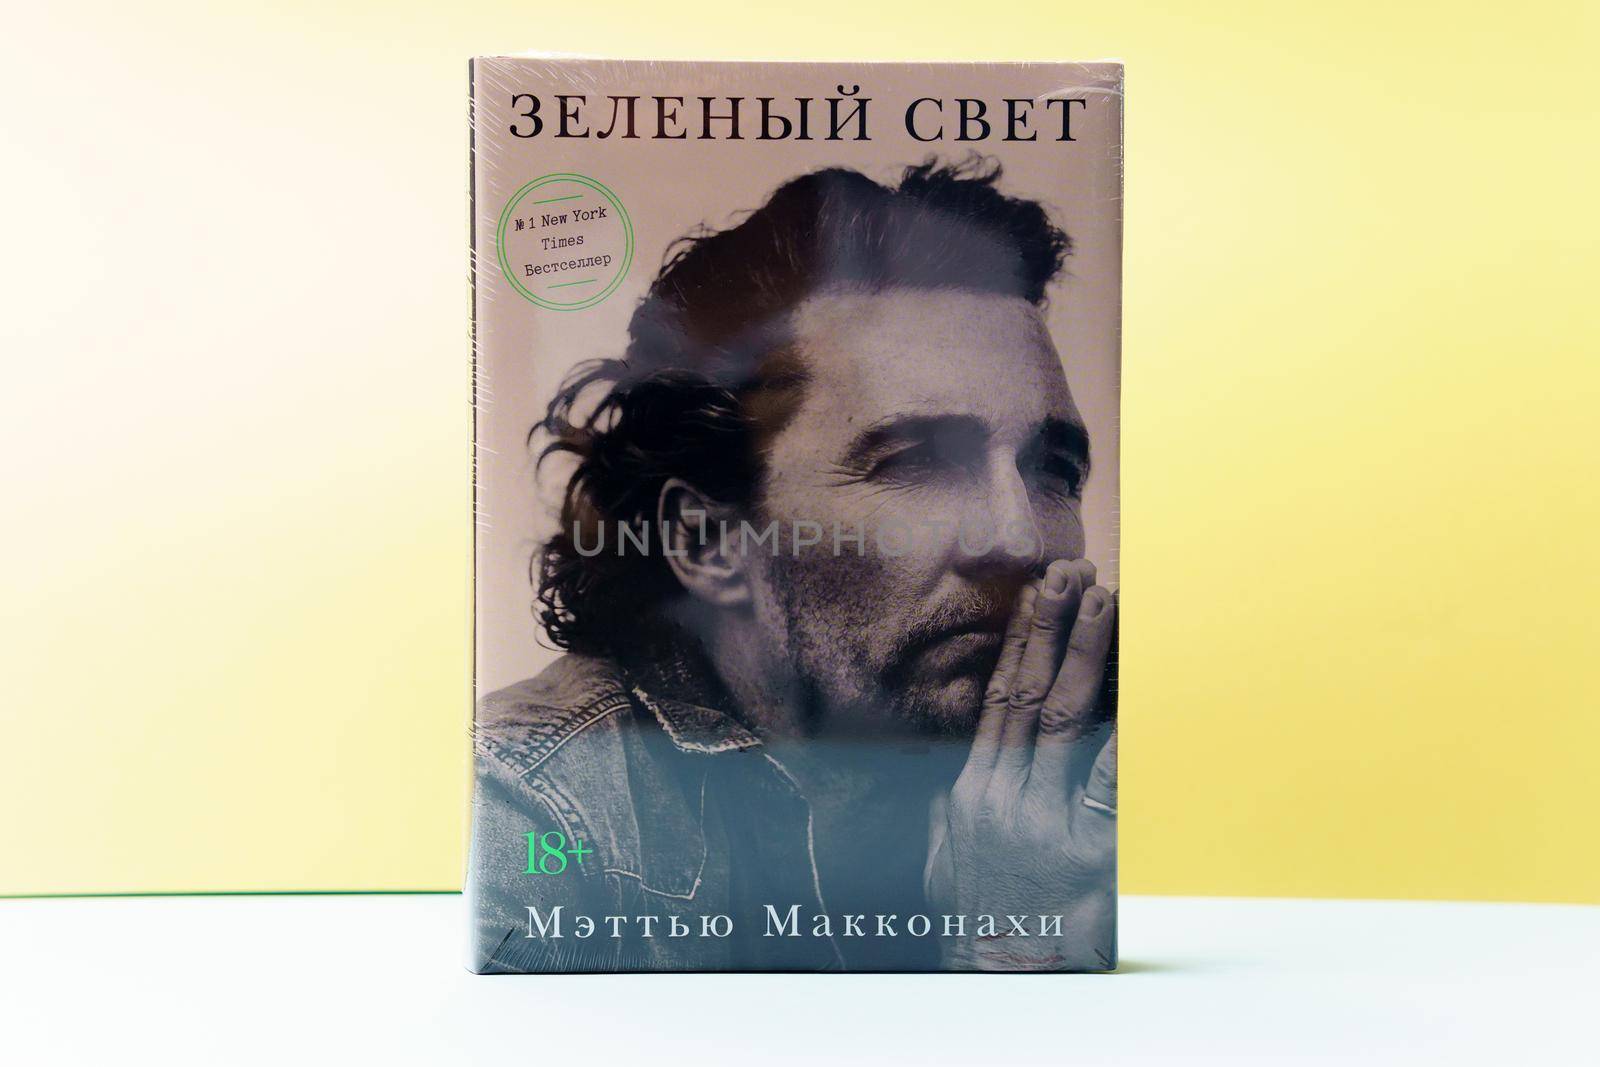 Tyumen, Russia-August 24, 2021: Greenlights is a book by American actor Matthew McConaughey